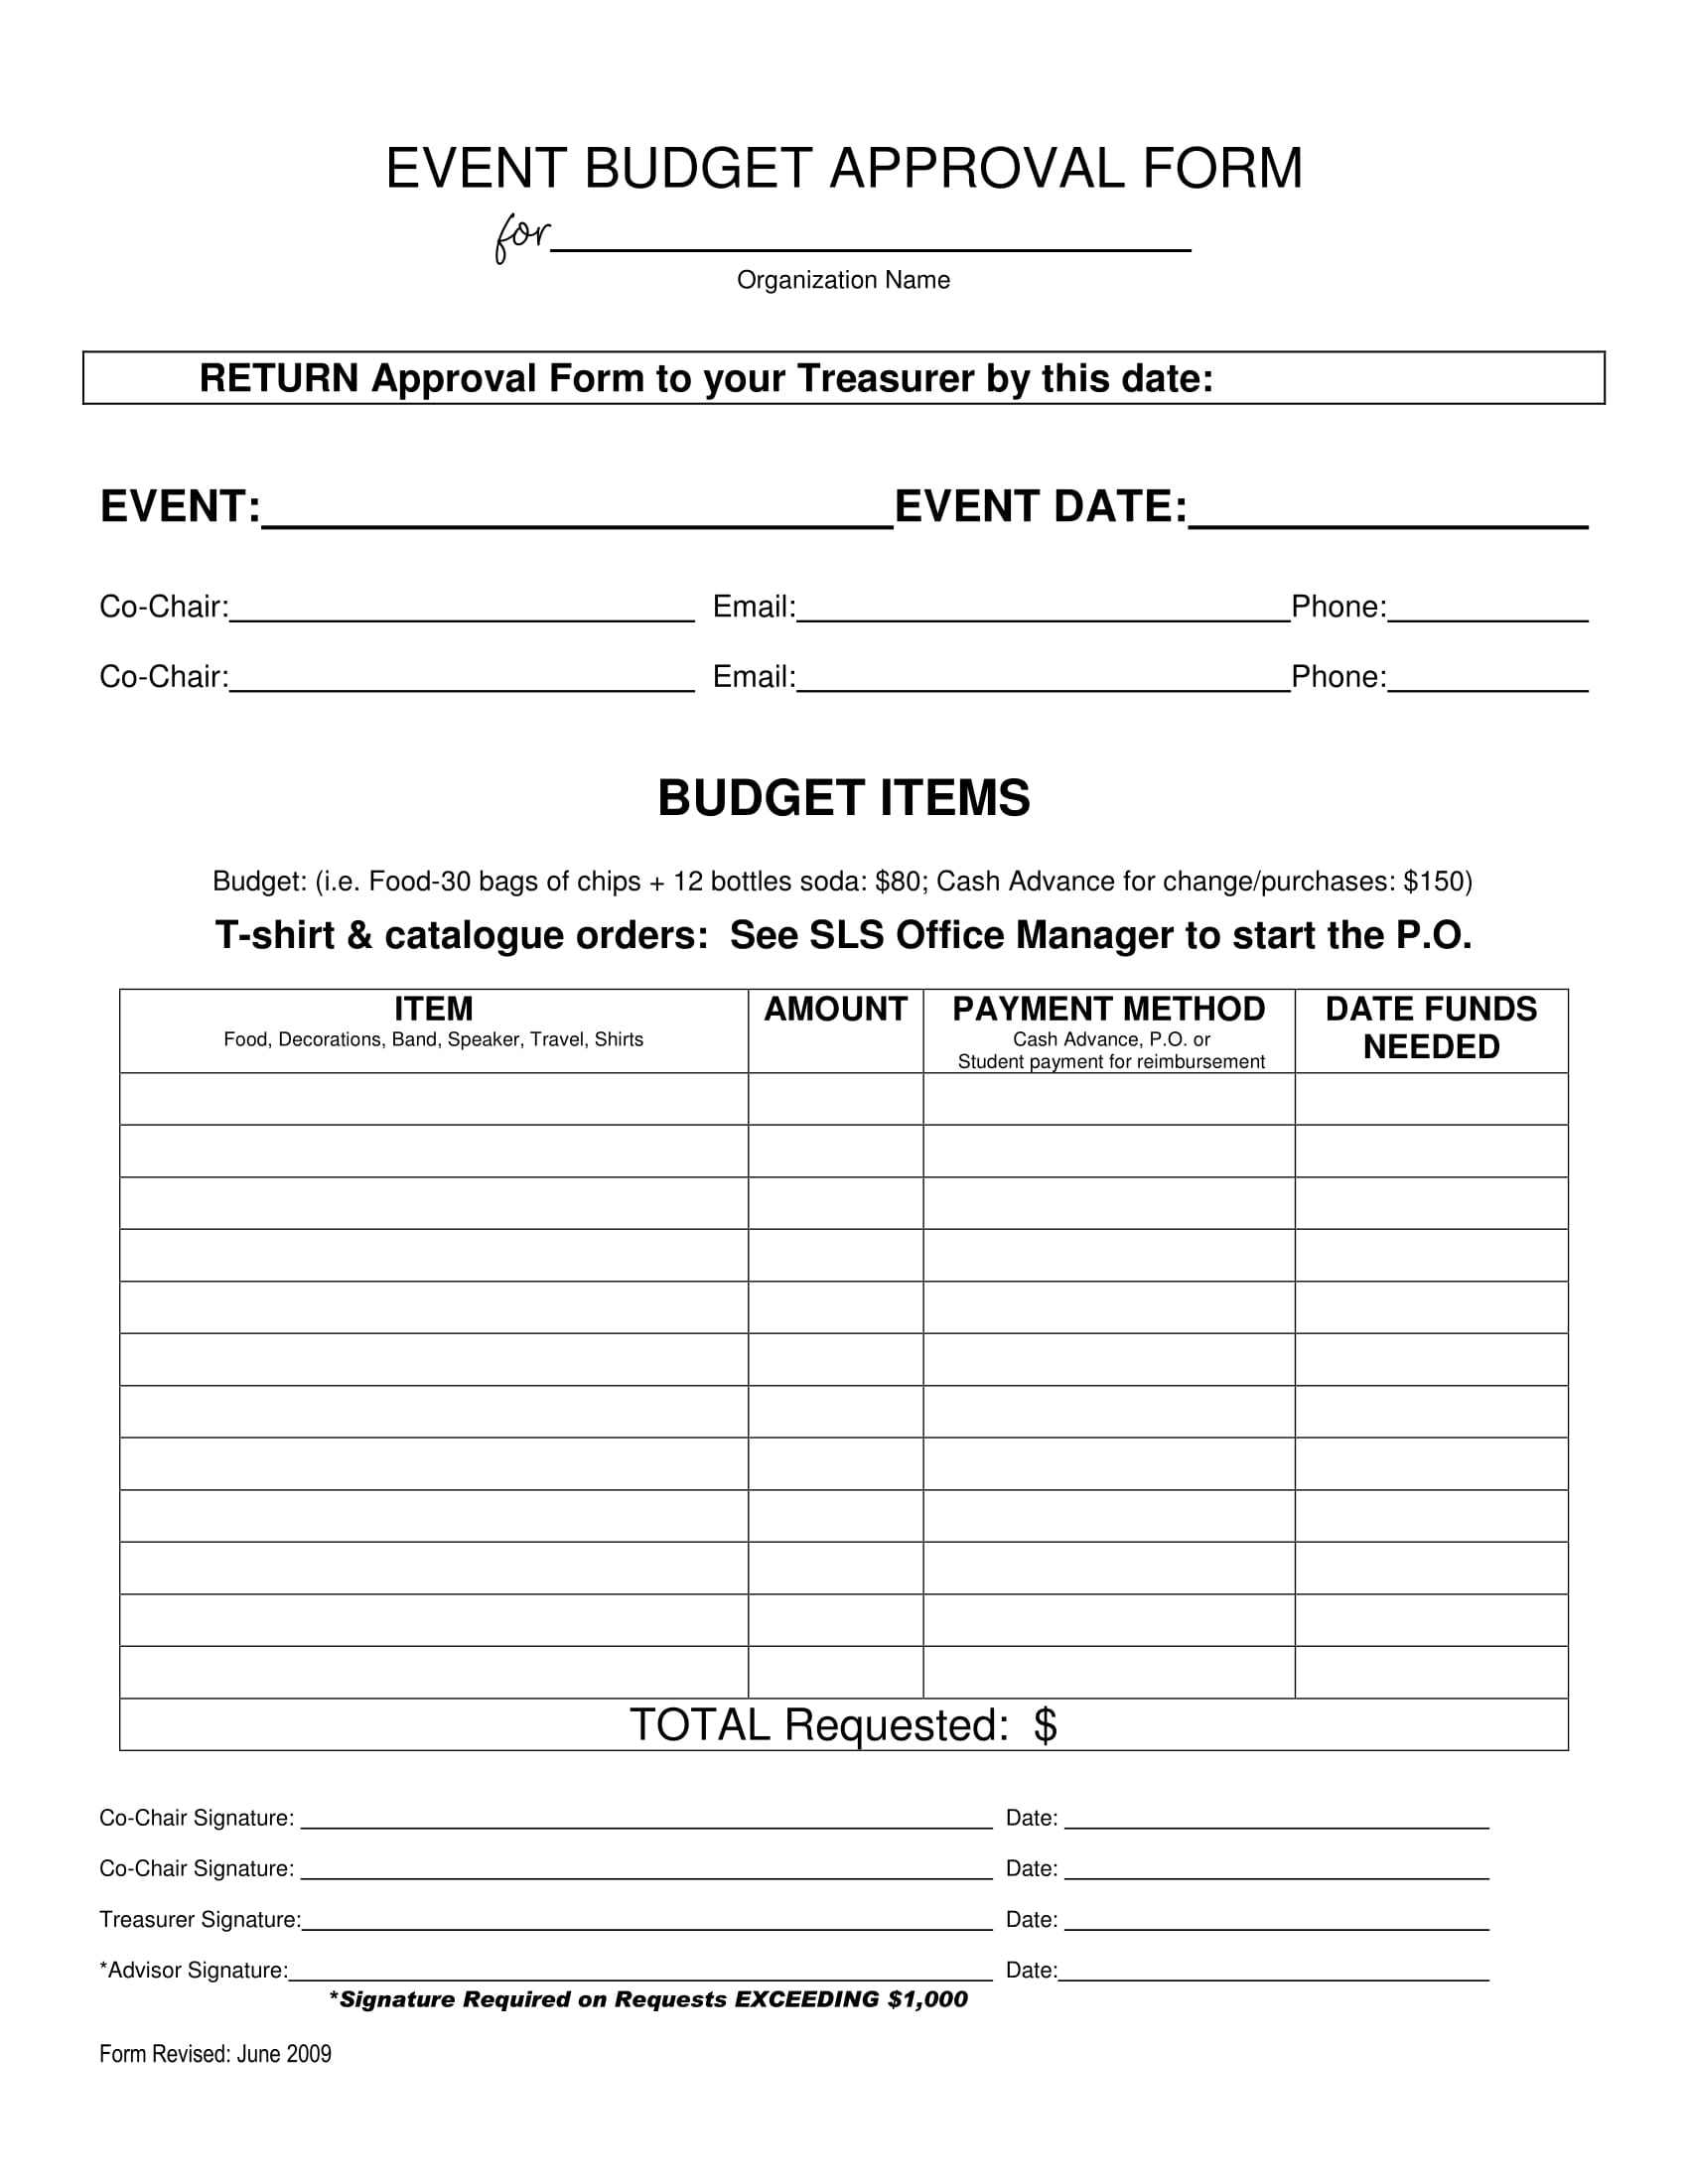 10 Approval Forms Travel Request And Approval Form Event And inside measurements 1700 X 2200